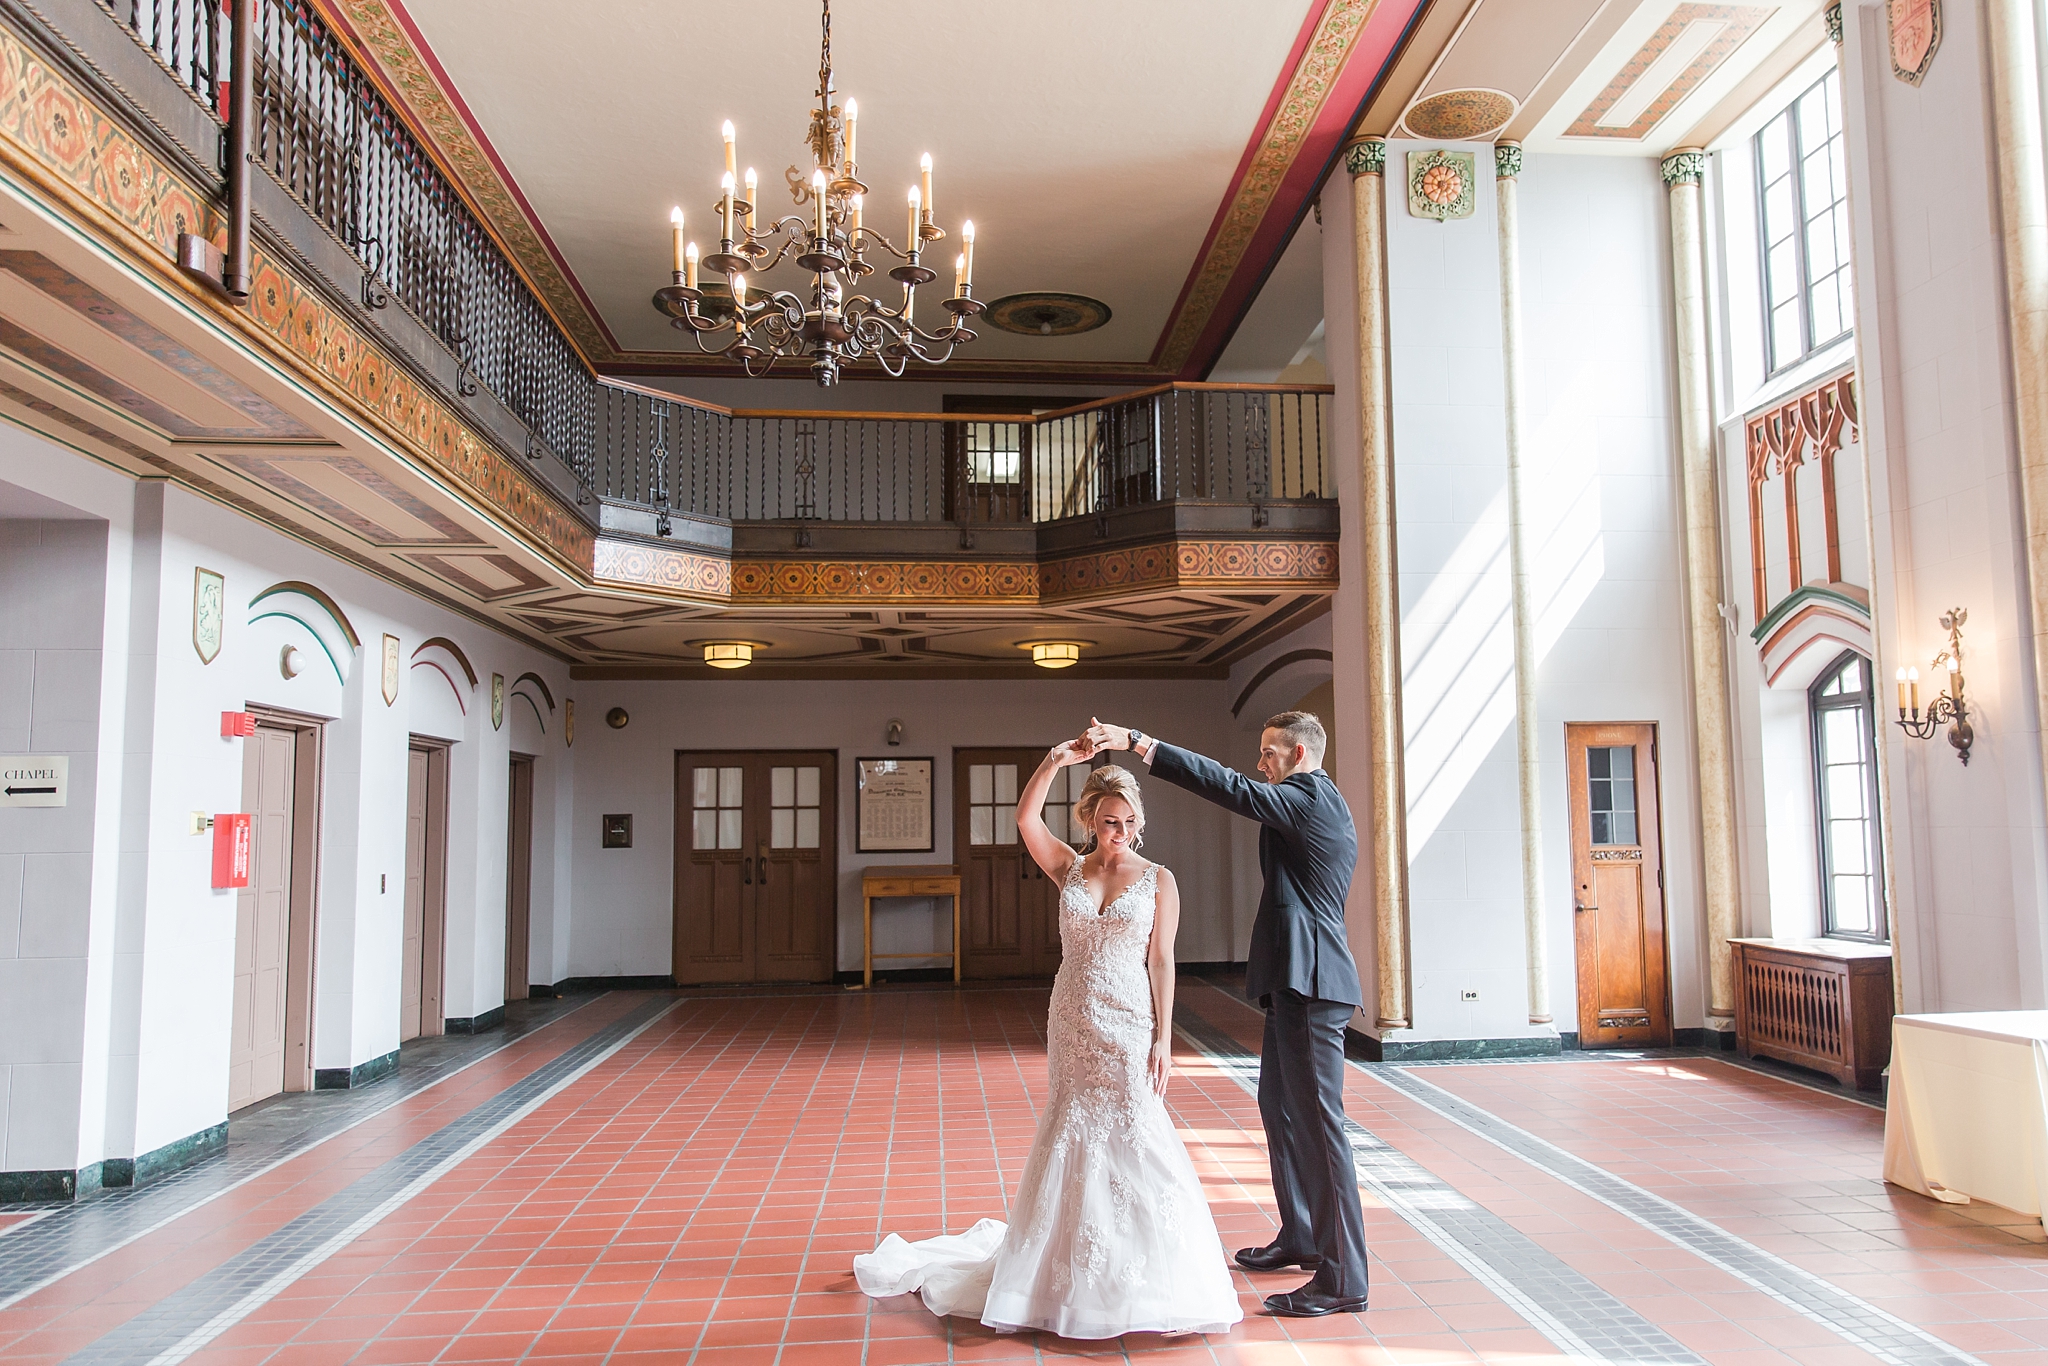 candid-romantic-wedding-photos-at-the-masonic-temple-belle-isle-detroit-institute-of-arts-in-detroit-michigan-by-courtney-carolyn-photography_0027.jpg